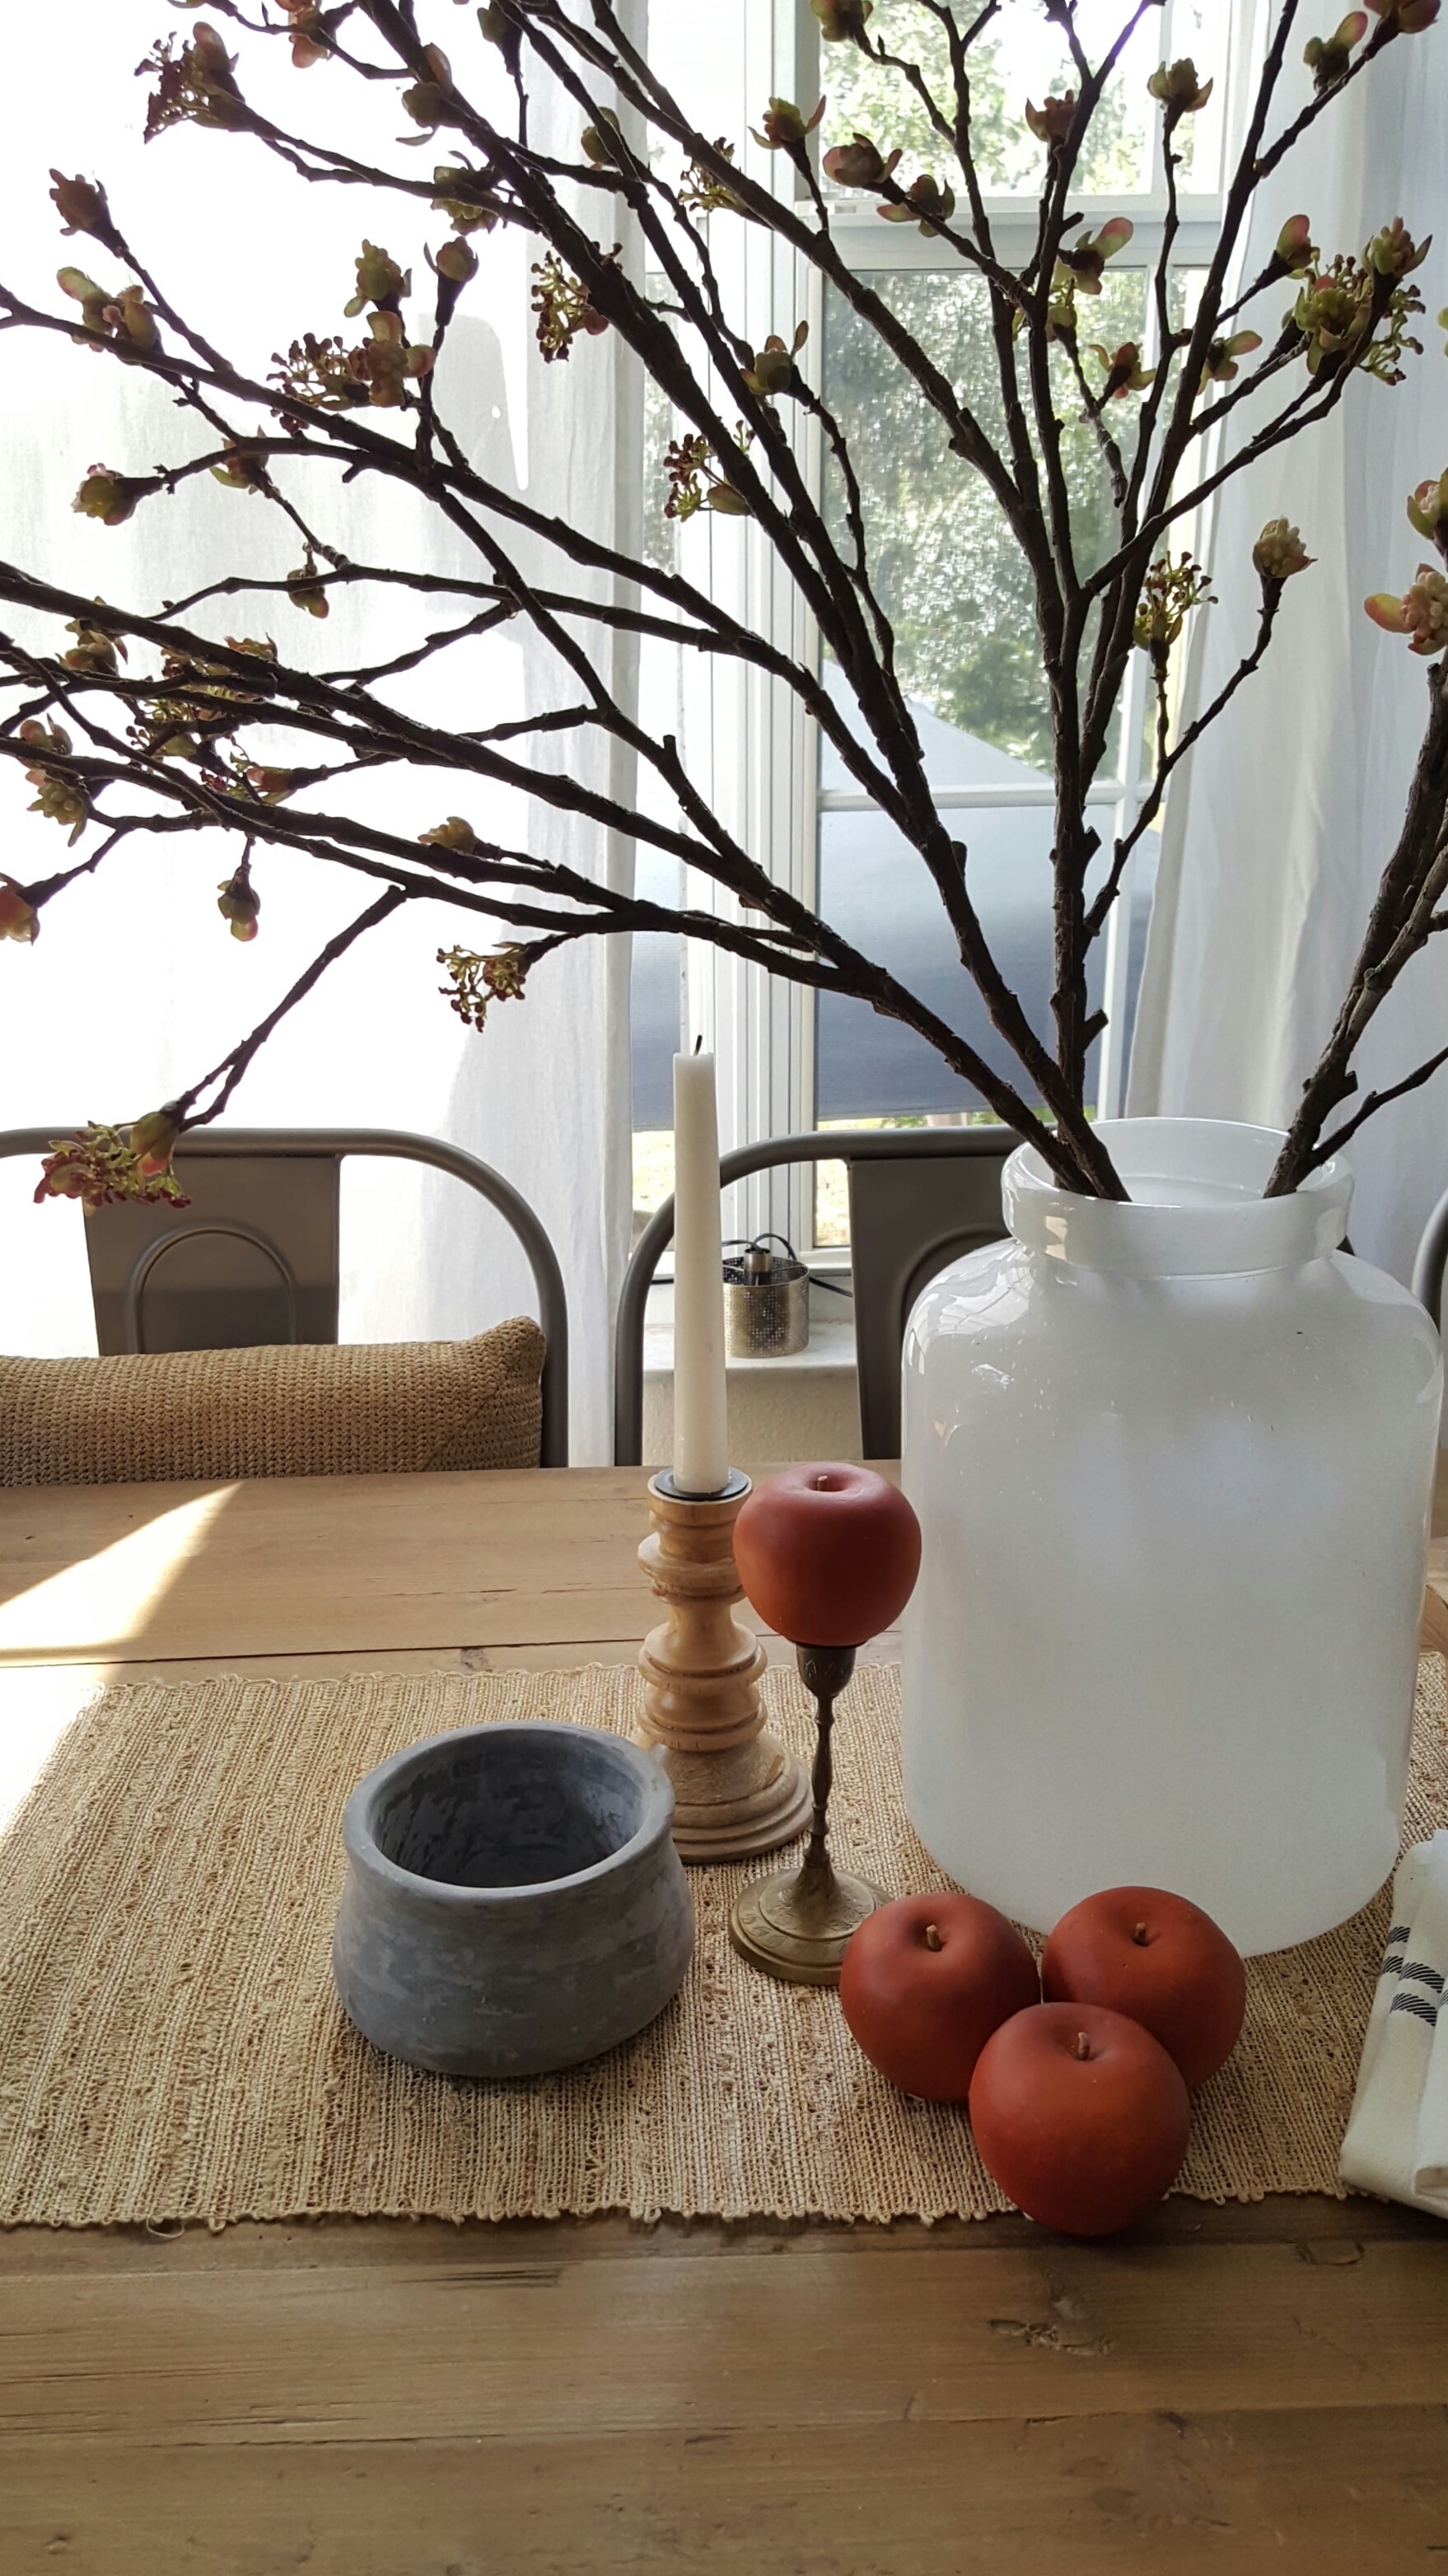 Shop the house design challenge Fall dining table decor apples and blossoms